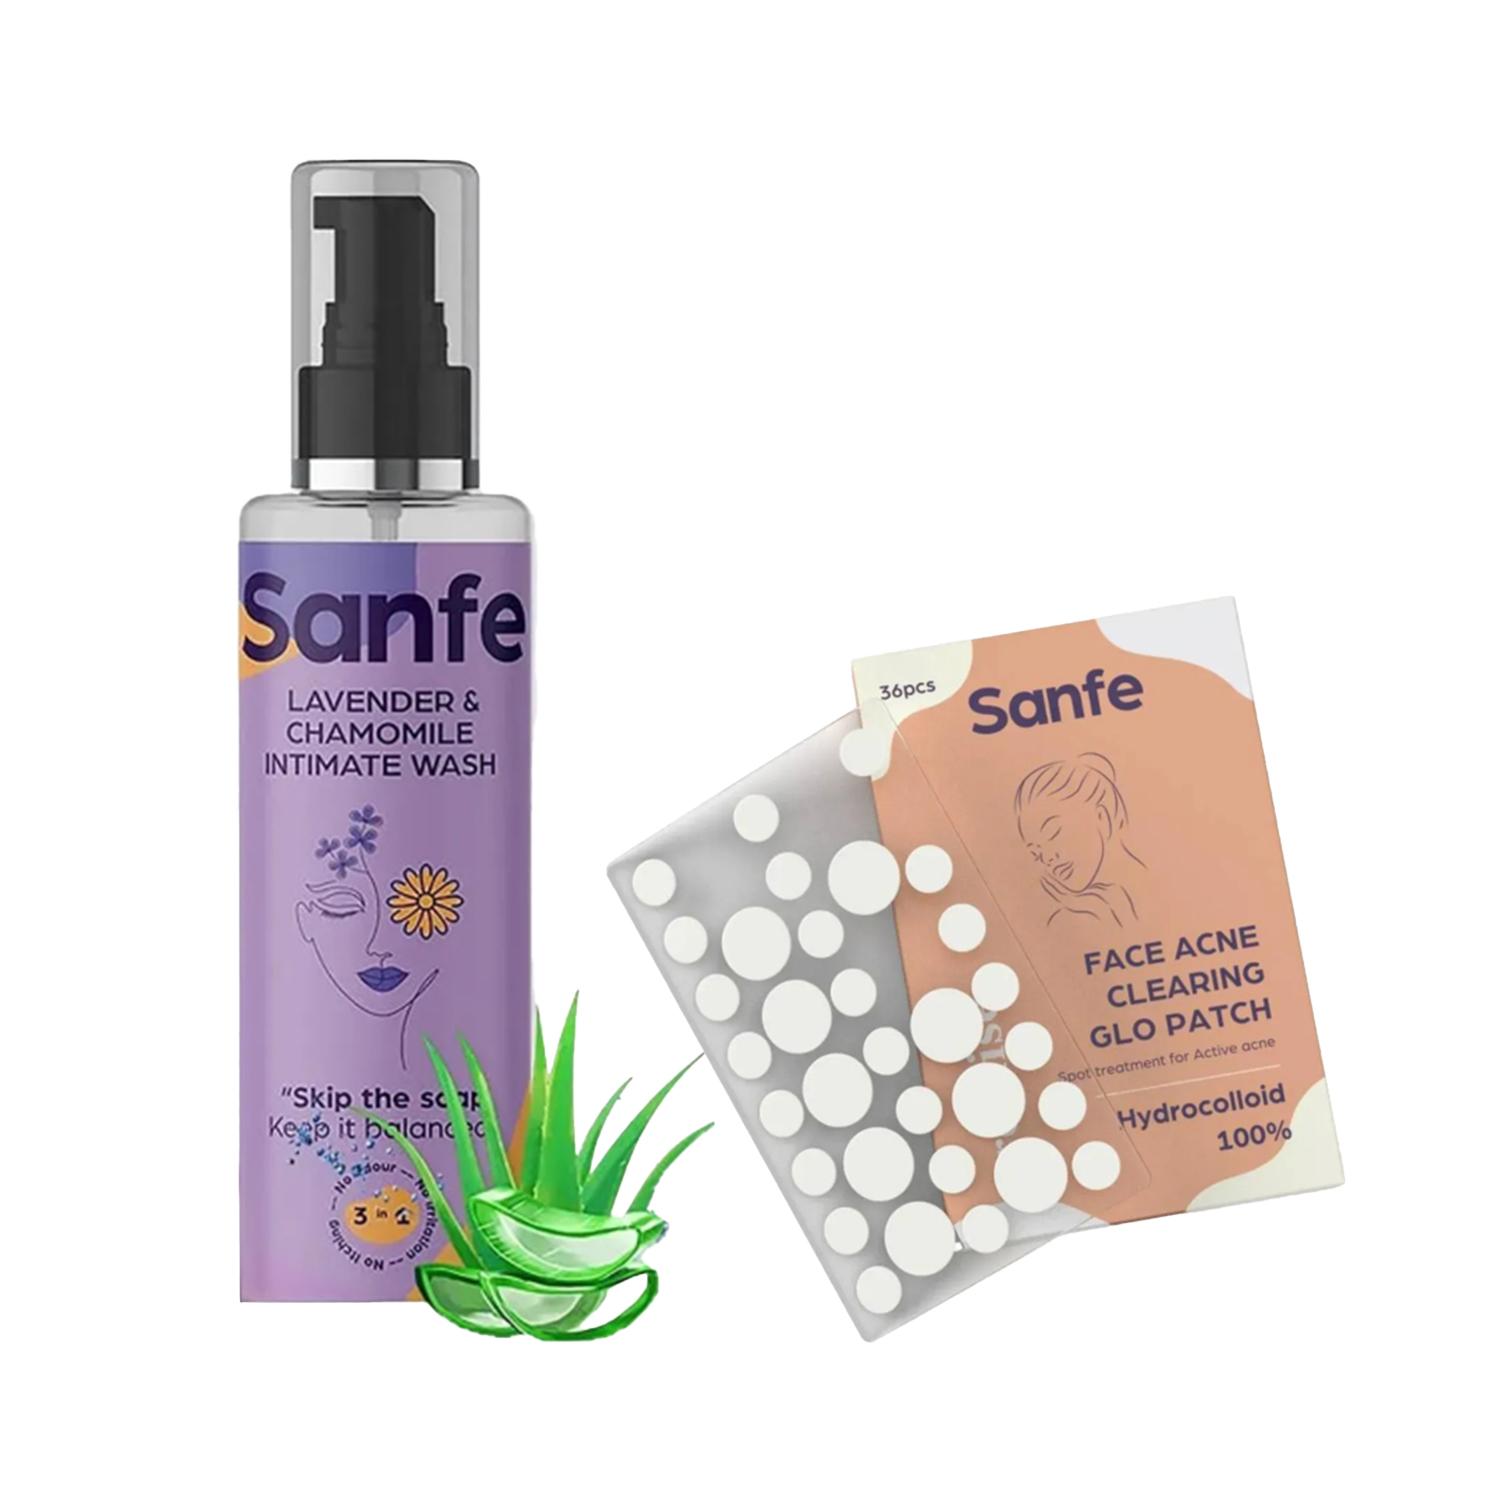 Sanfe | Sanfe Intimate Wash - Lavender & Chamomile and Promise Face Acne Patch - Pack of 36 Combo